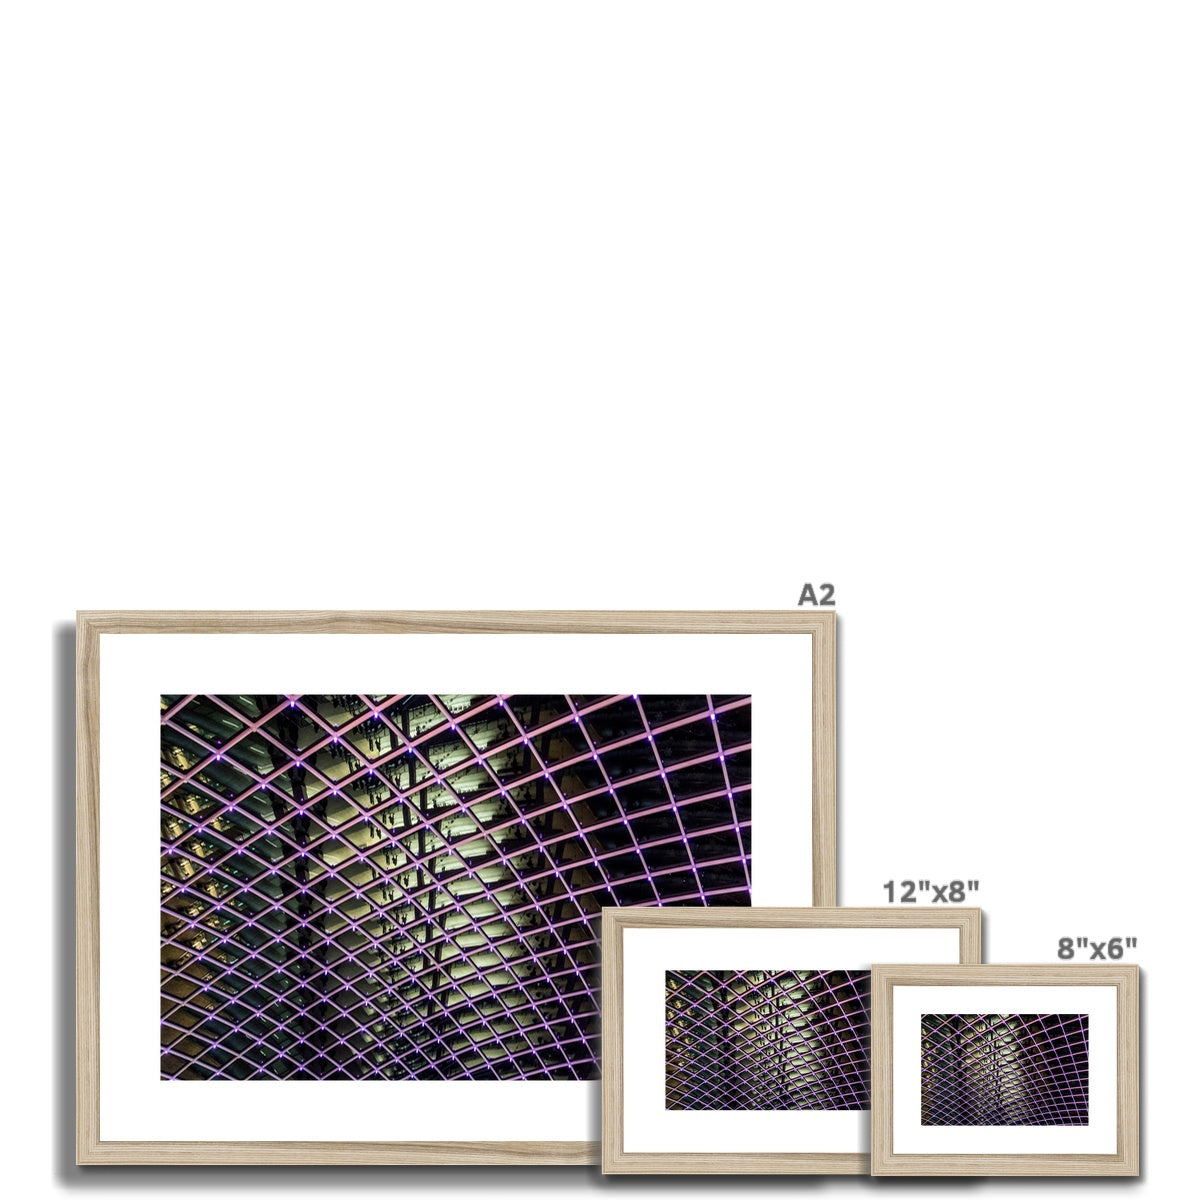 Illuminated grid pattern on a glass ceiling captured at night Framed & Mounted Print